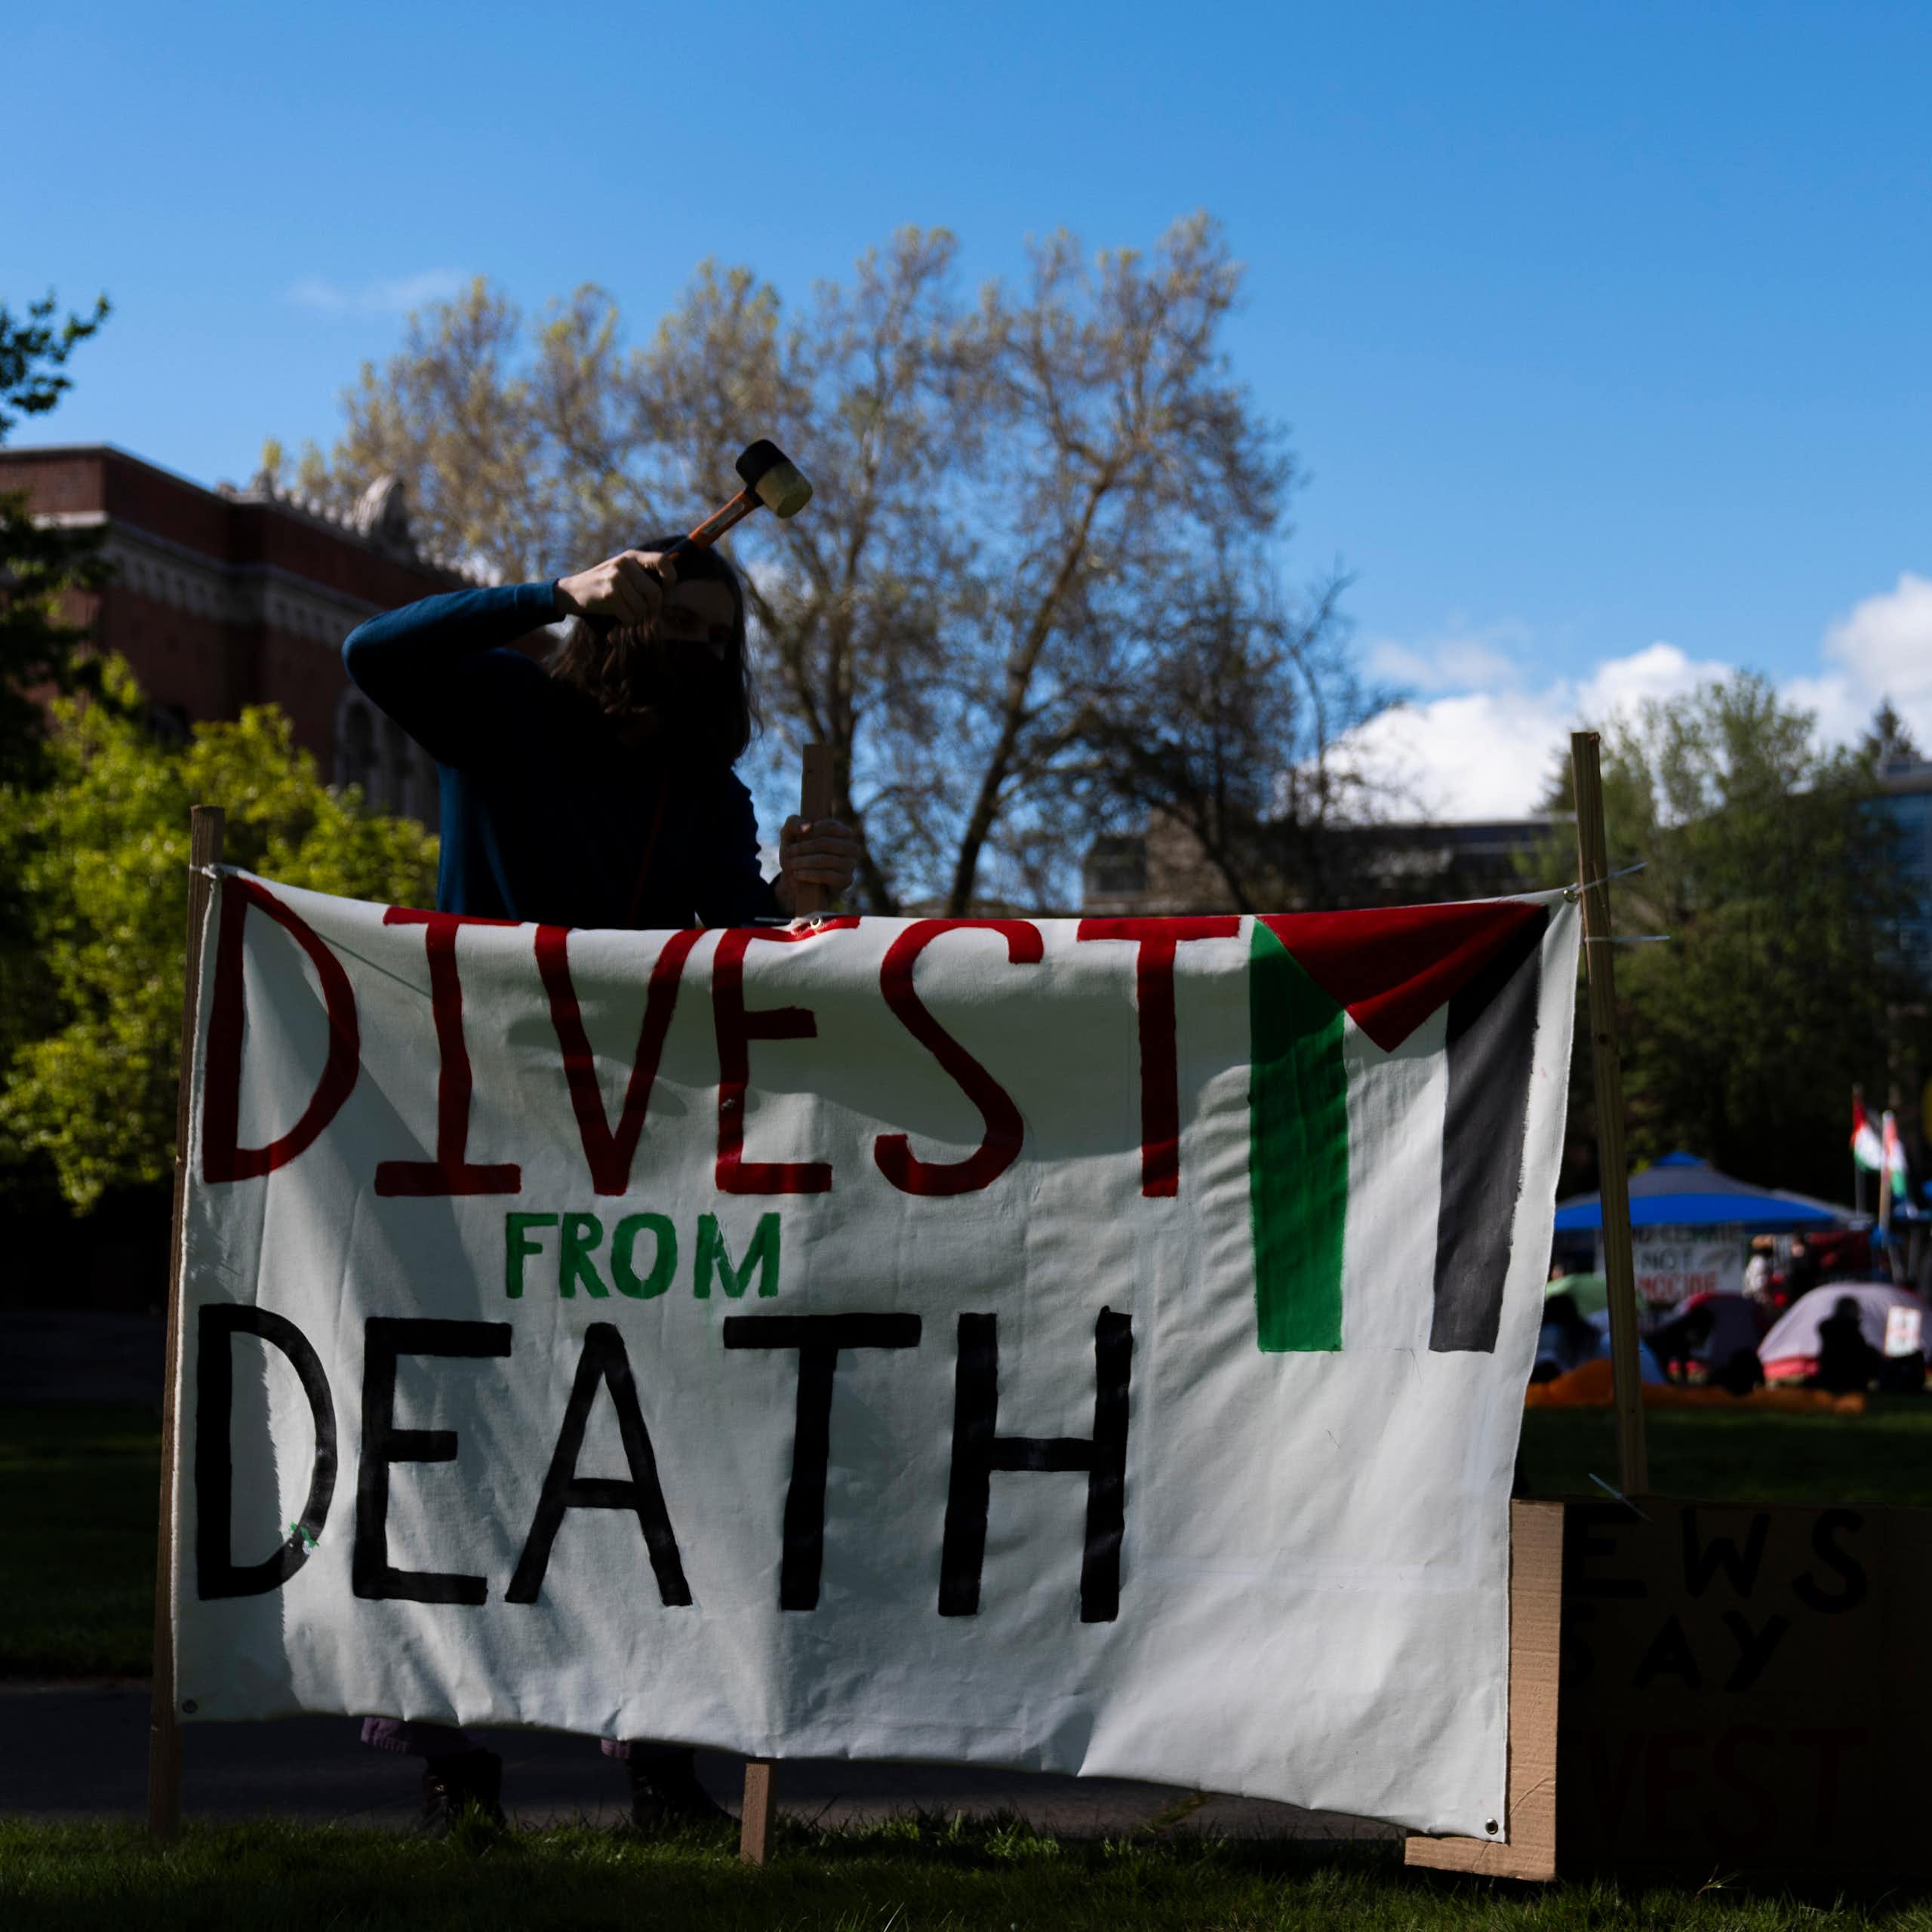 A student at the University of Oregon sets up a sign that reads 'Divest from death' at a campus encampment.